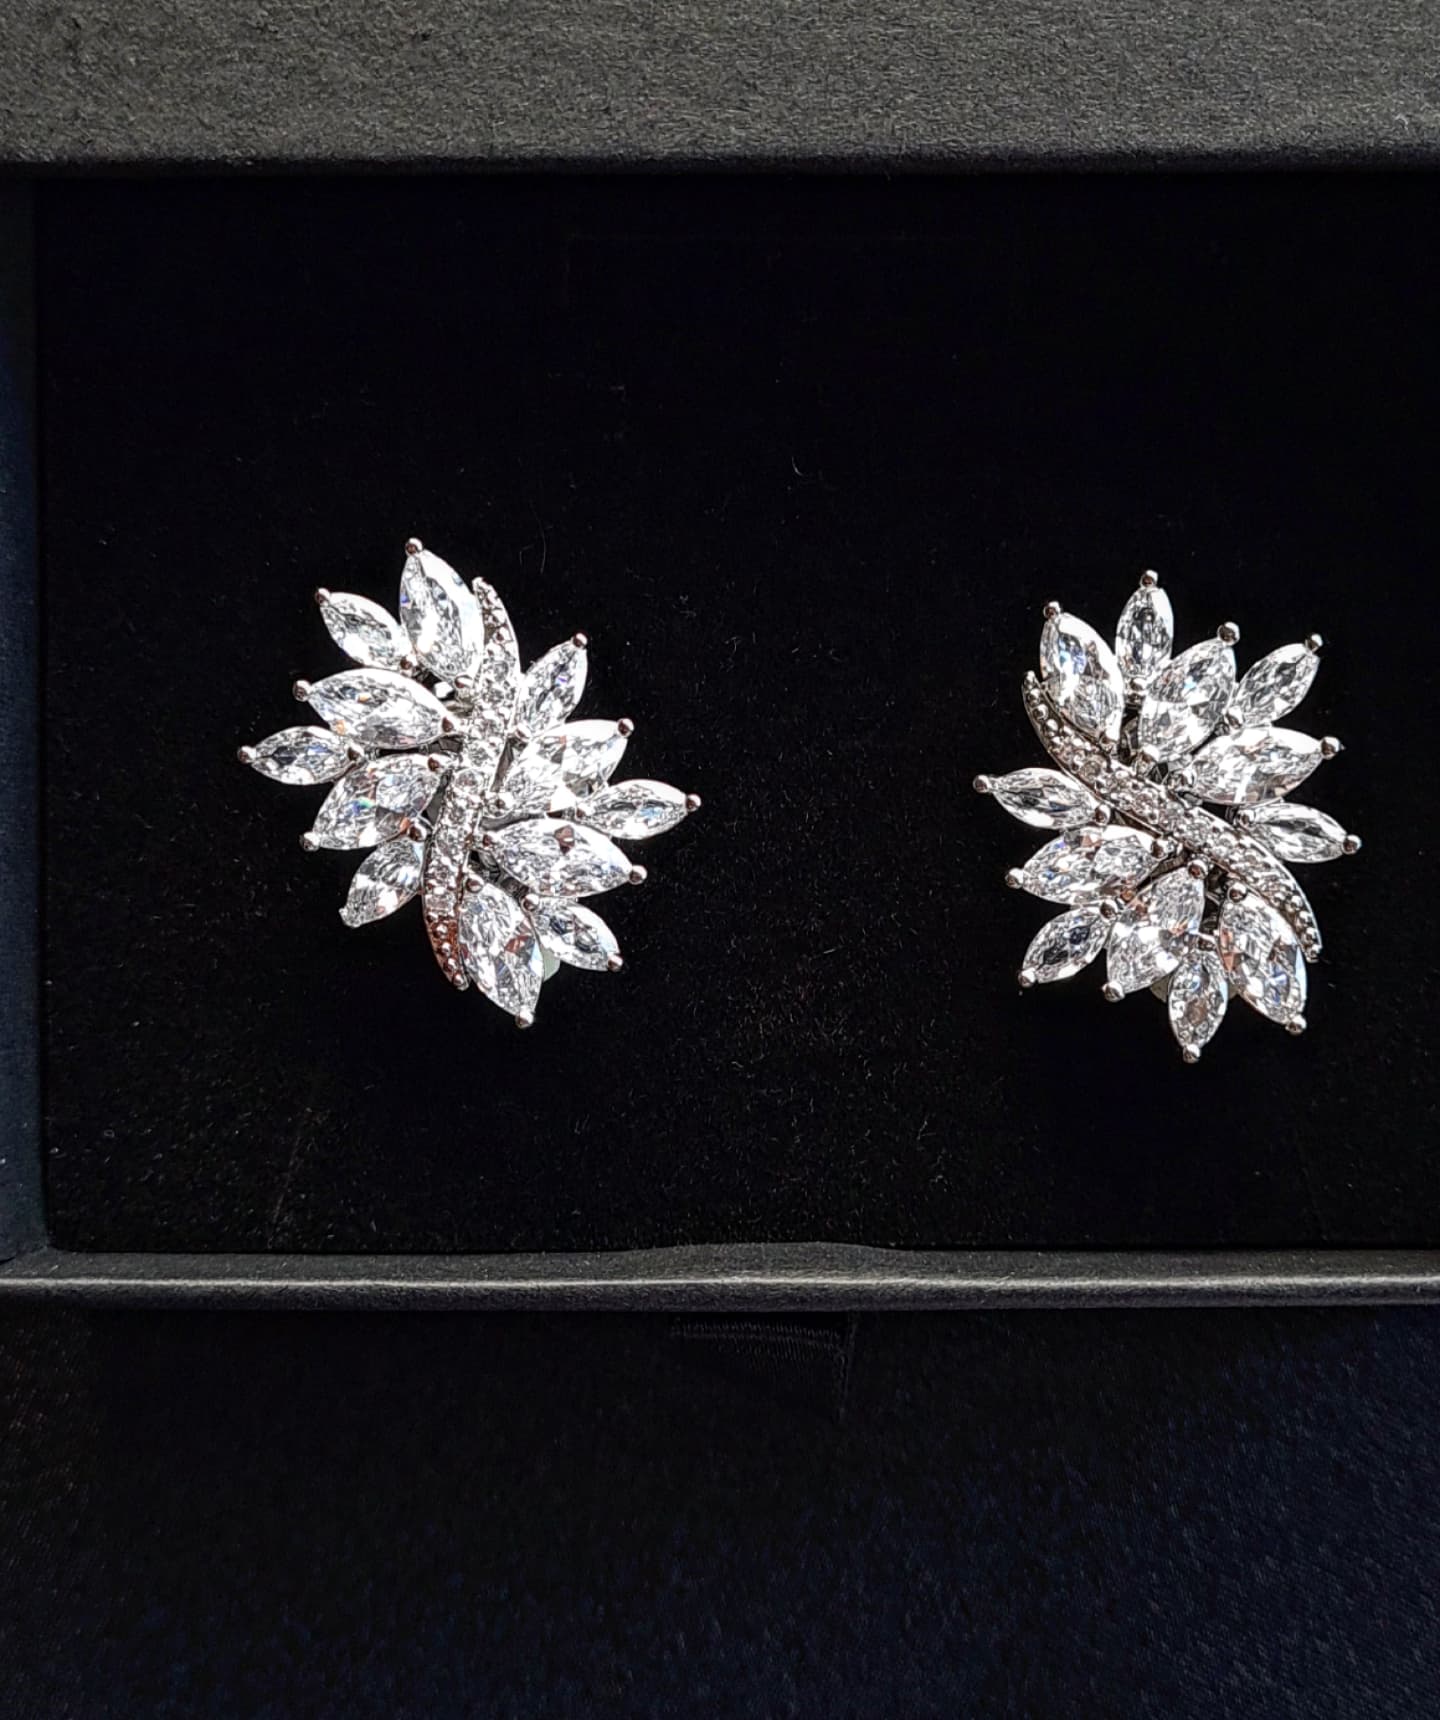 A pair of sterling silver stud earrings with cubic zirconia stones. The earrings are flower-shaped and have a delicate, intricate design. The cubic zirconia stones are clear and sparkling. The earrings are sitting on a black velvet surface.